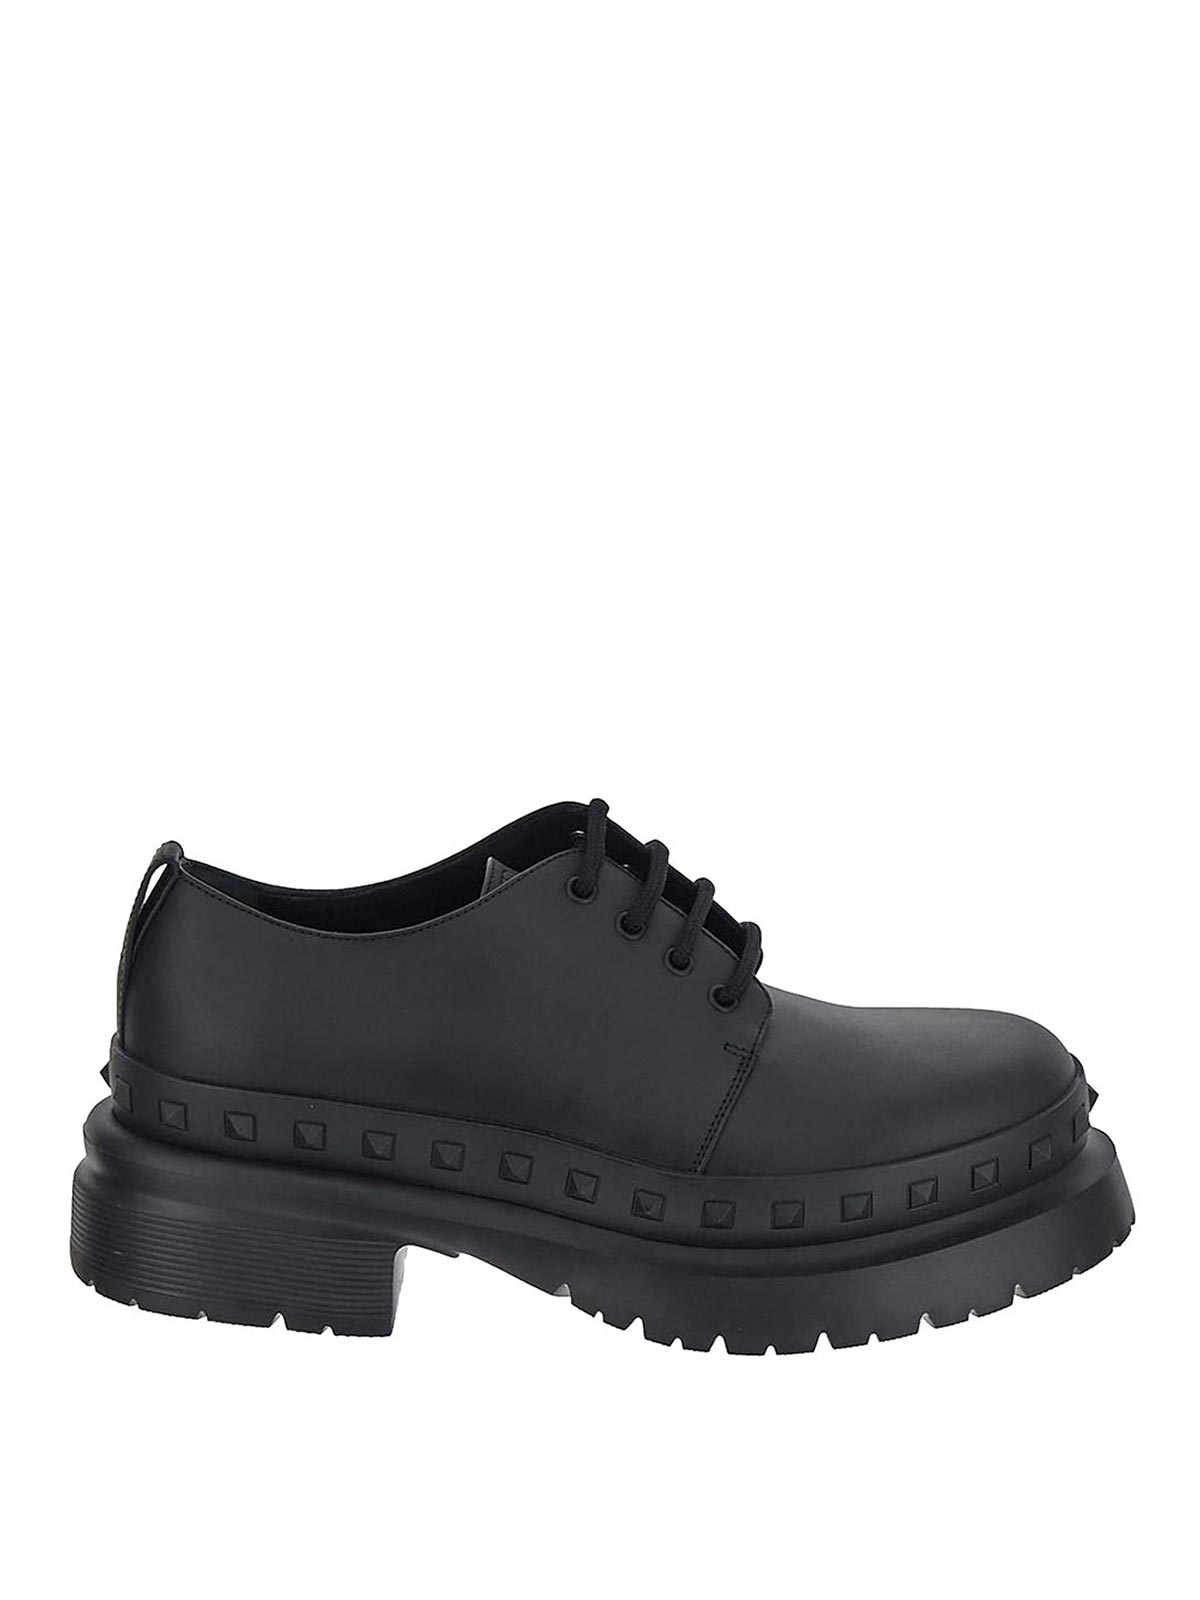 VALENTINO GARAVANI OXFORD SHOES IN BLACK WITH STUDDED TRIMS